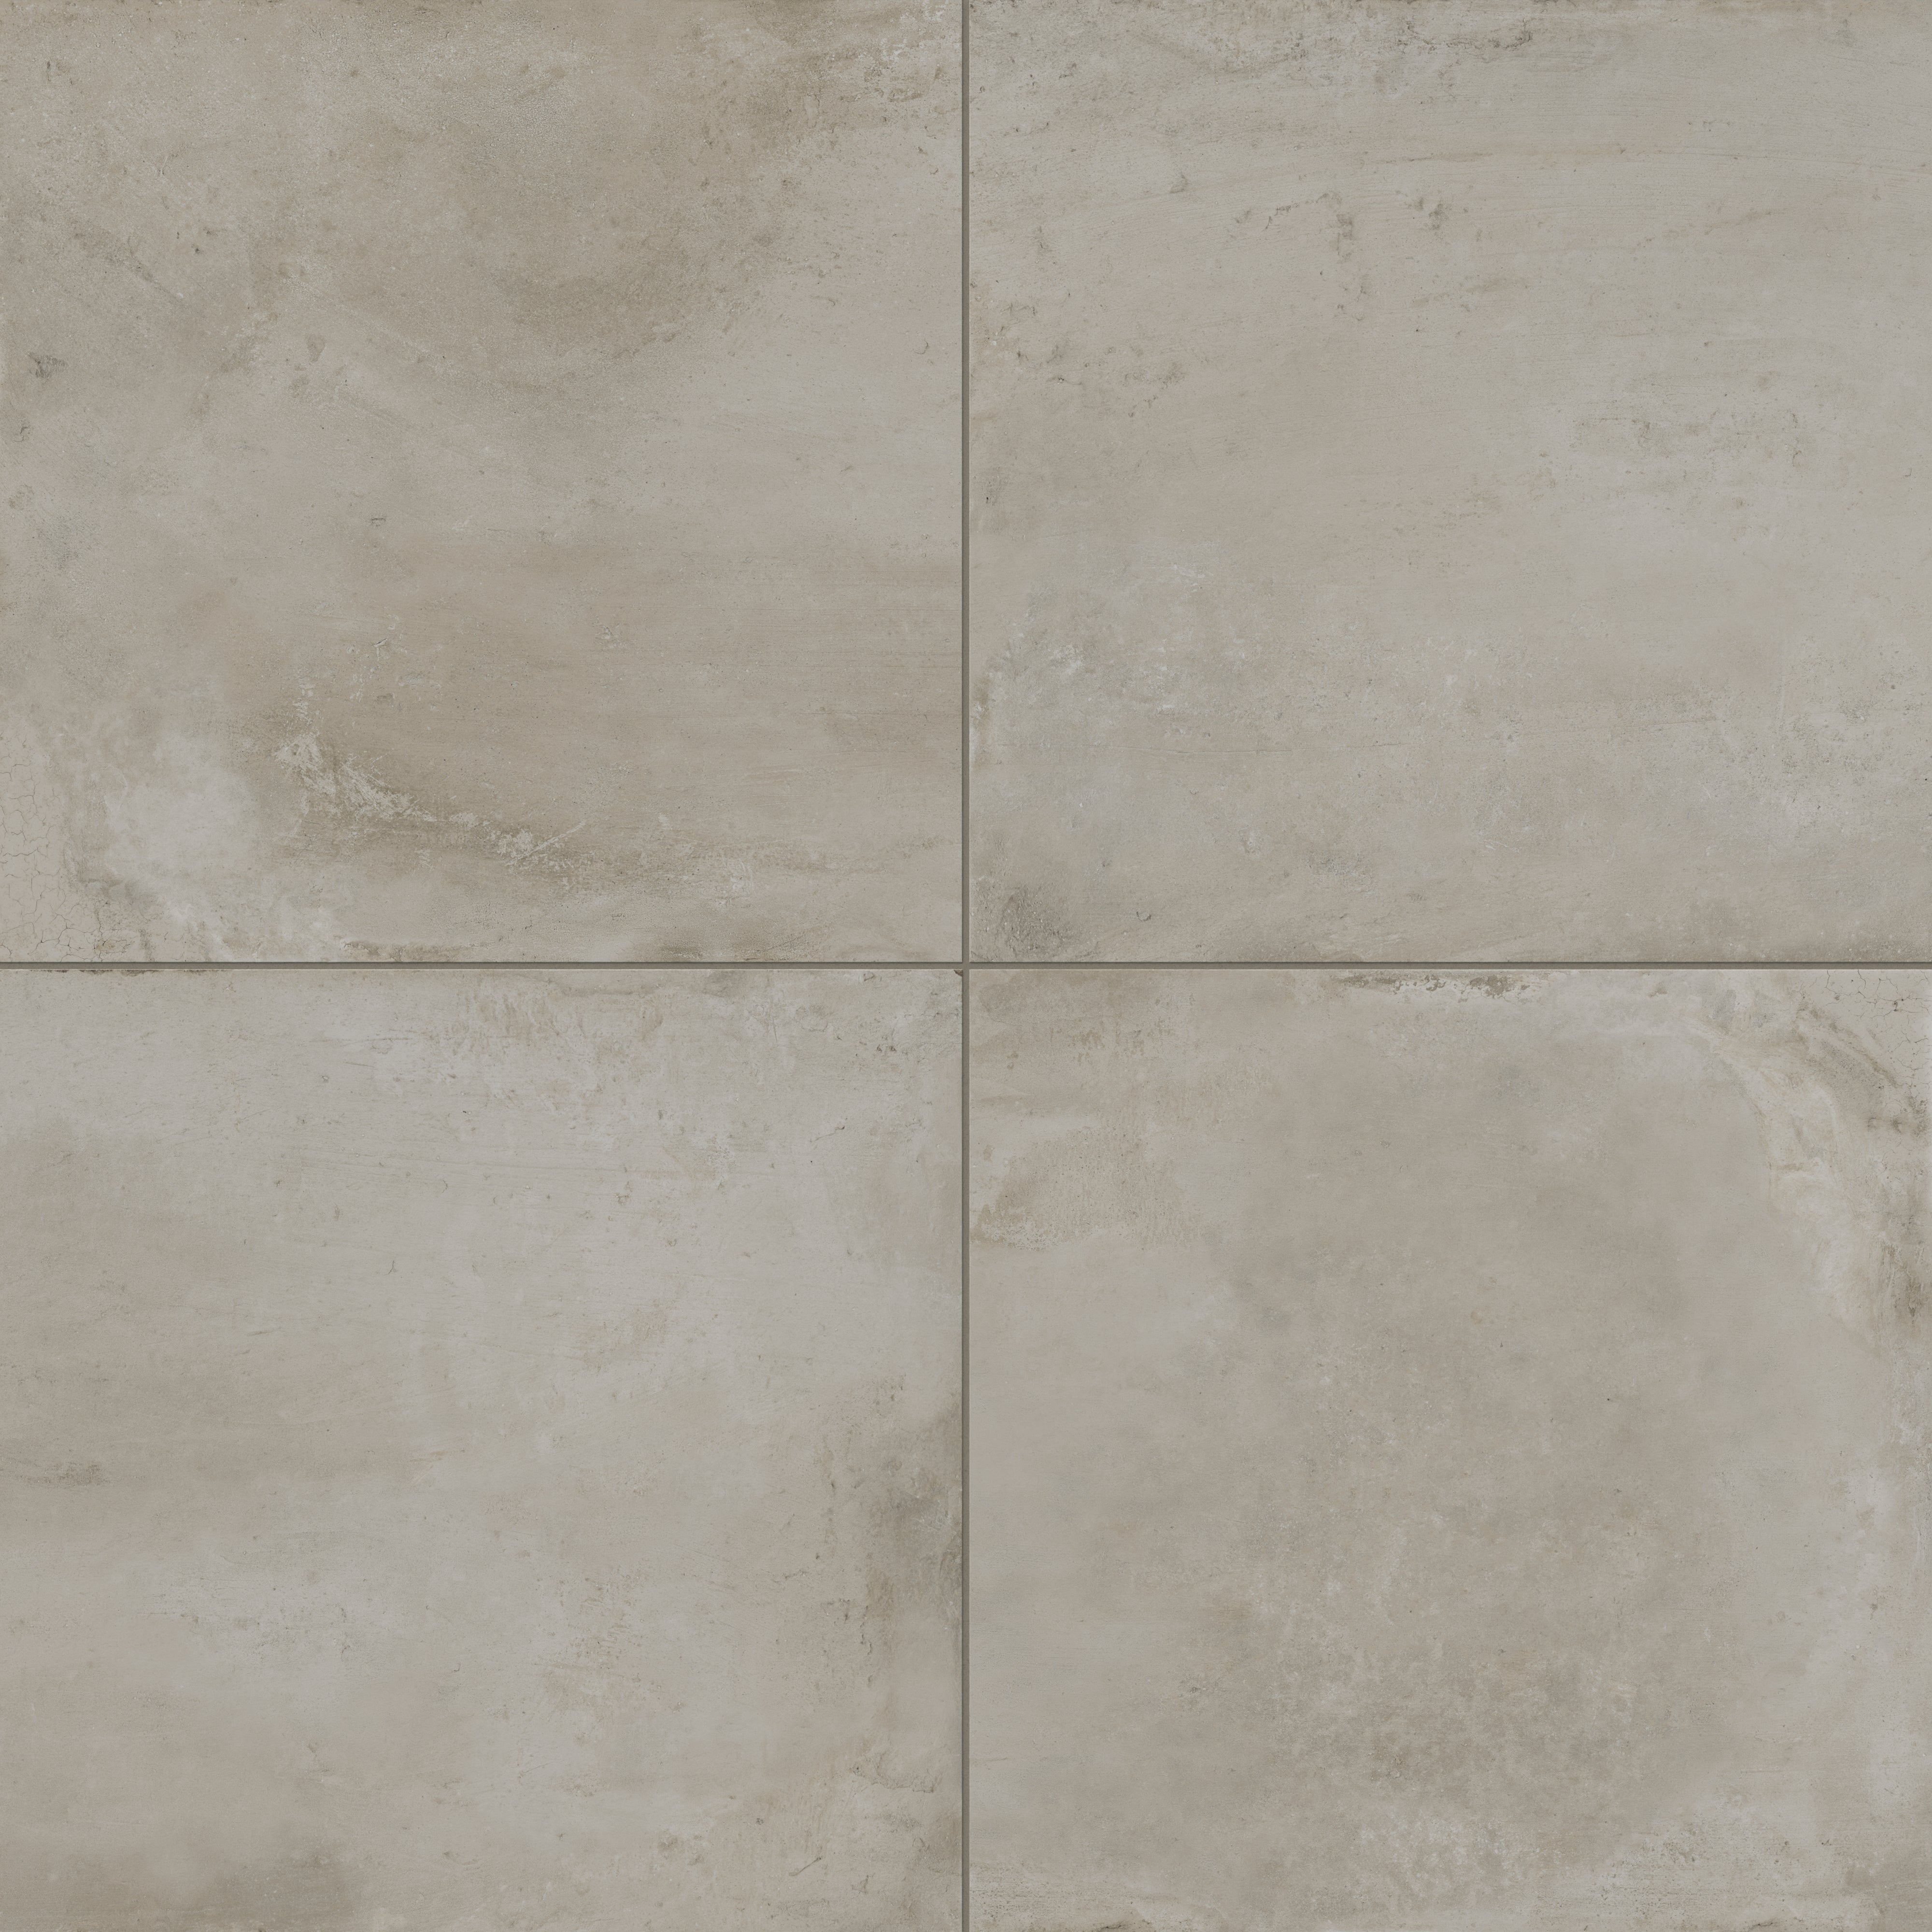 Ramsey 24x24 Grip Porcelain 2cm Paver Tile in Putty